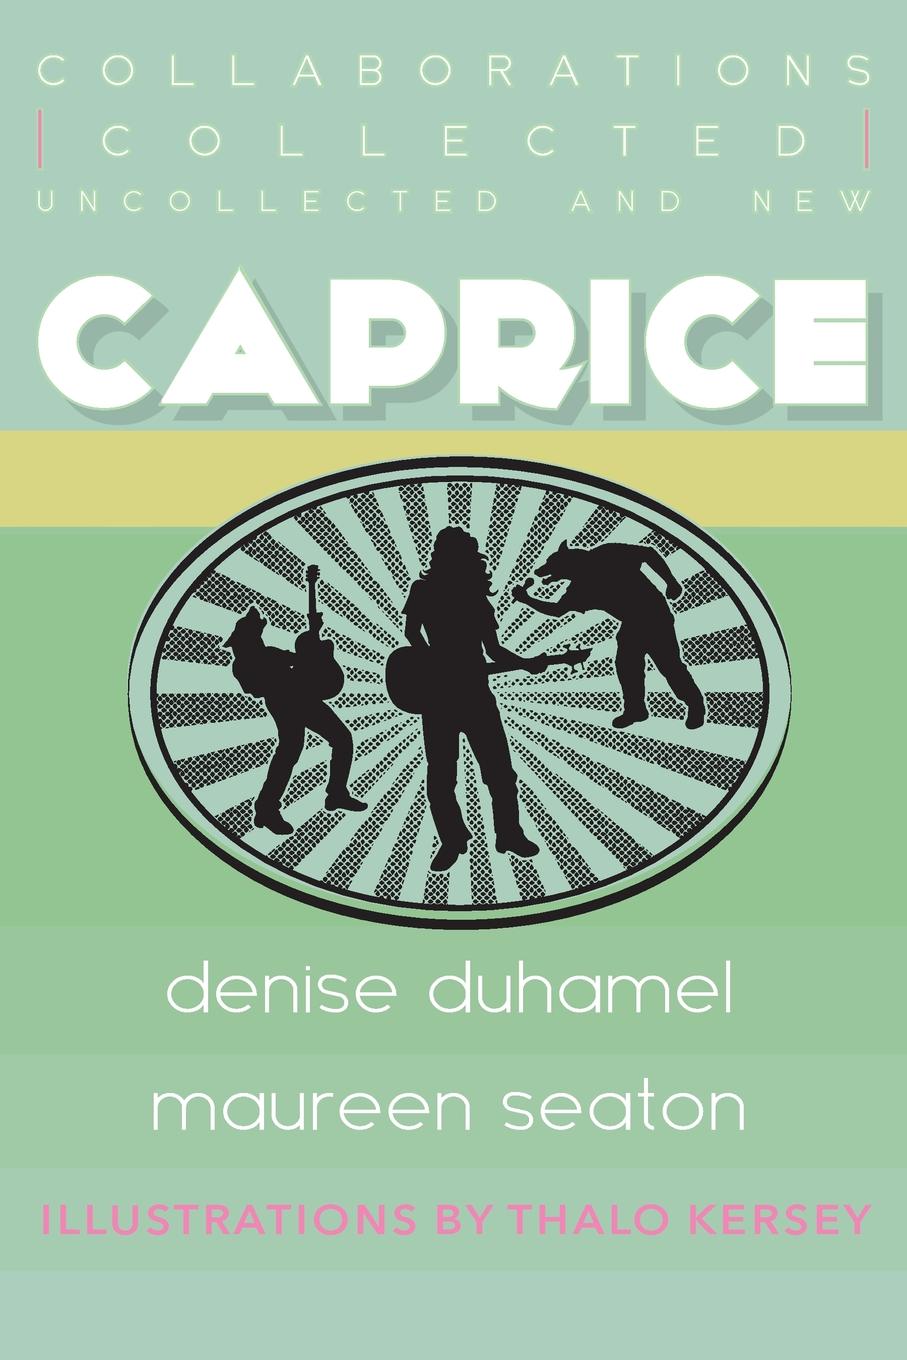 Caprice: Collected, Uncollected, and New Collaborations